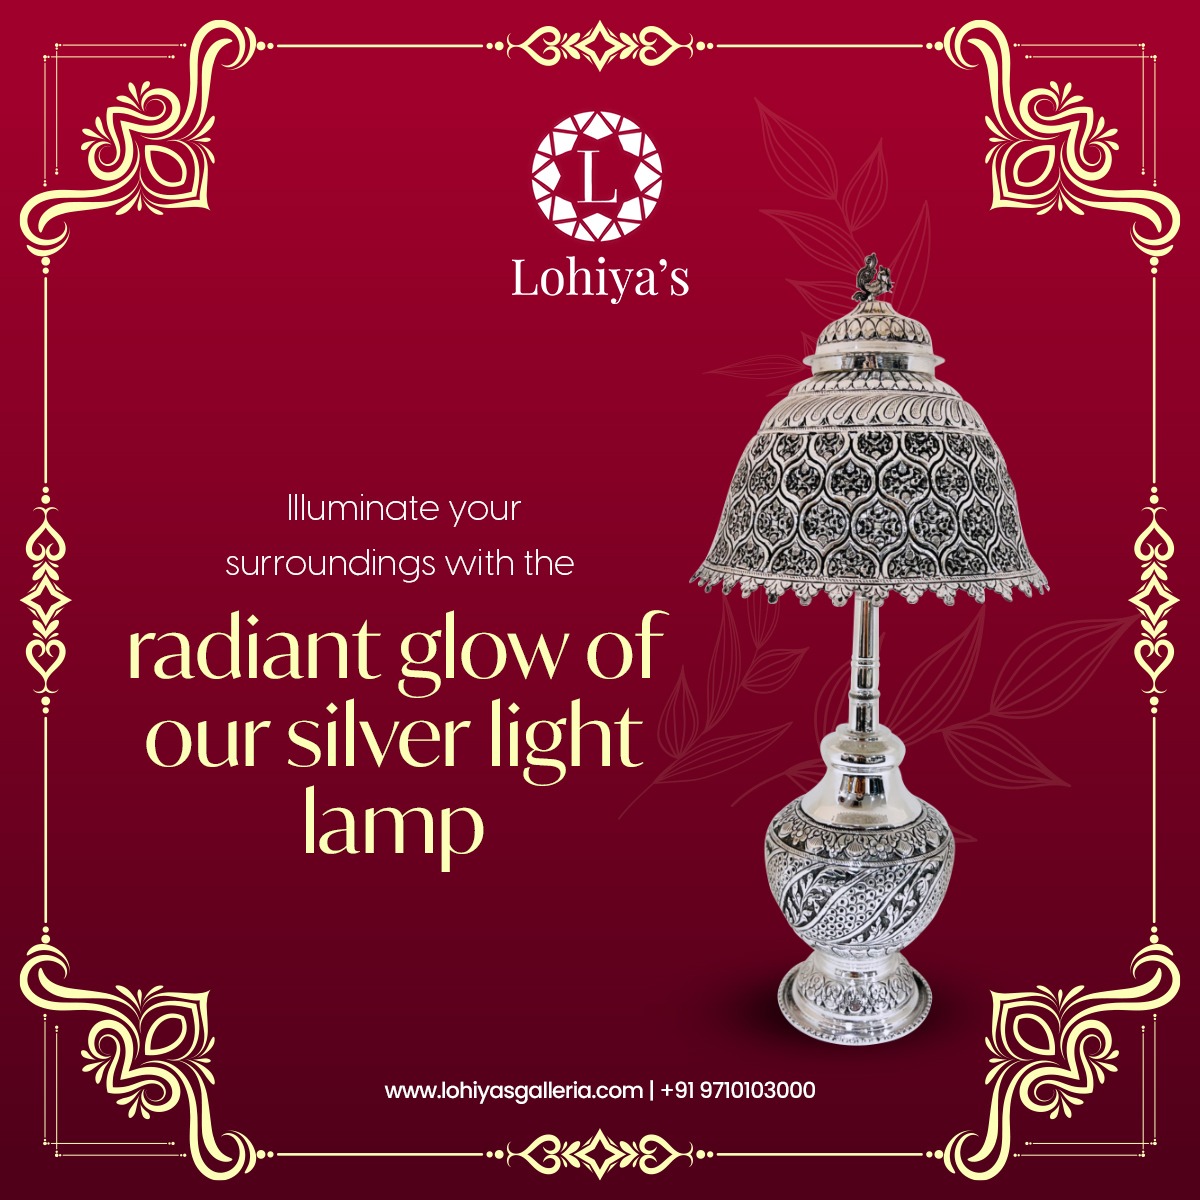 Shining bright like a silver dream ✨✨✨✨ Loving this exquisite silver lamp from Lohiyas Galleria! It adds a touch of elegance and sophistication to any space. 
.
To buy this connect to us at - +91 97101 03000
.
#SilverGlow #LohiyasGalleria #LightingGoals #InteriorDecor